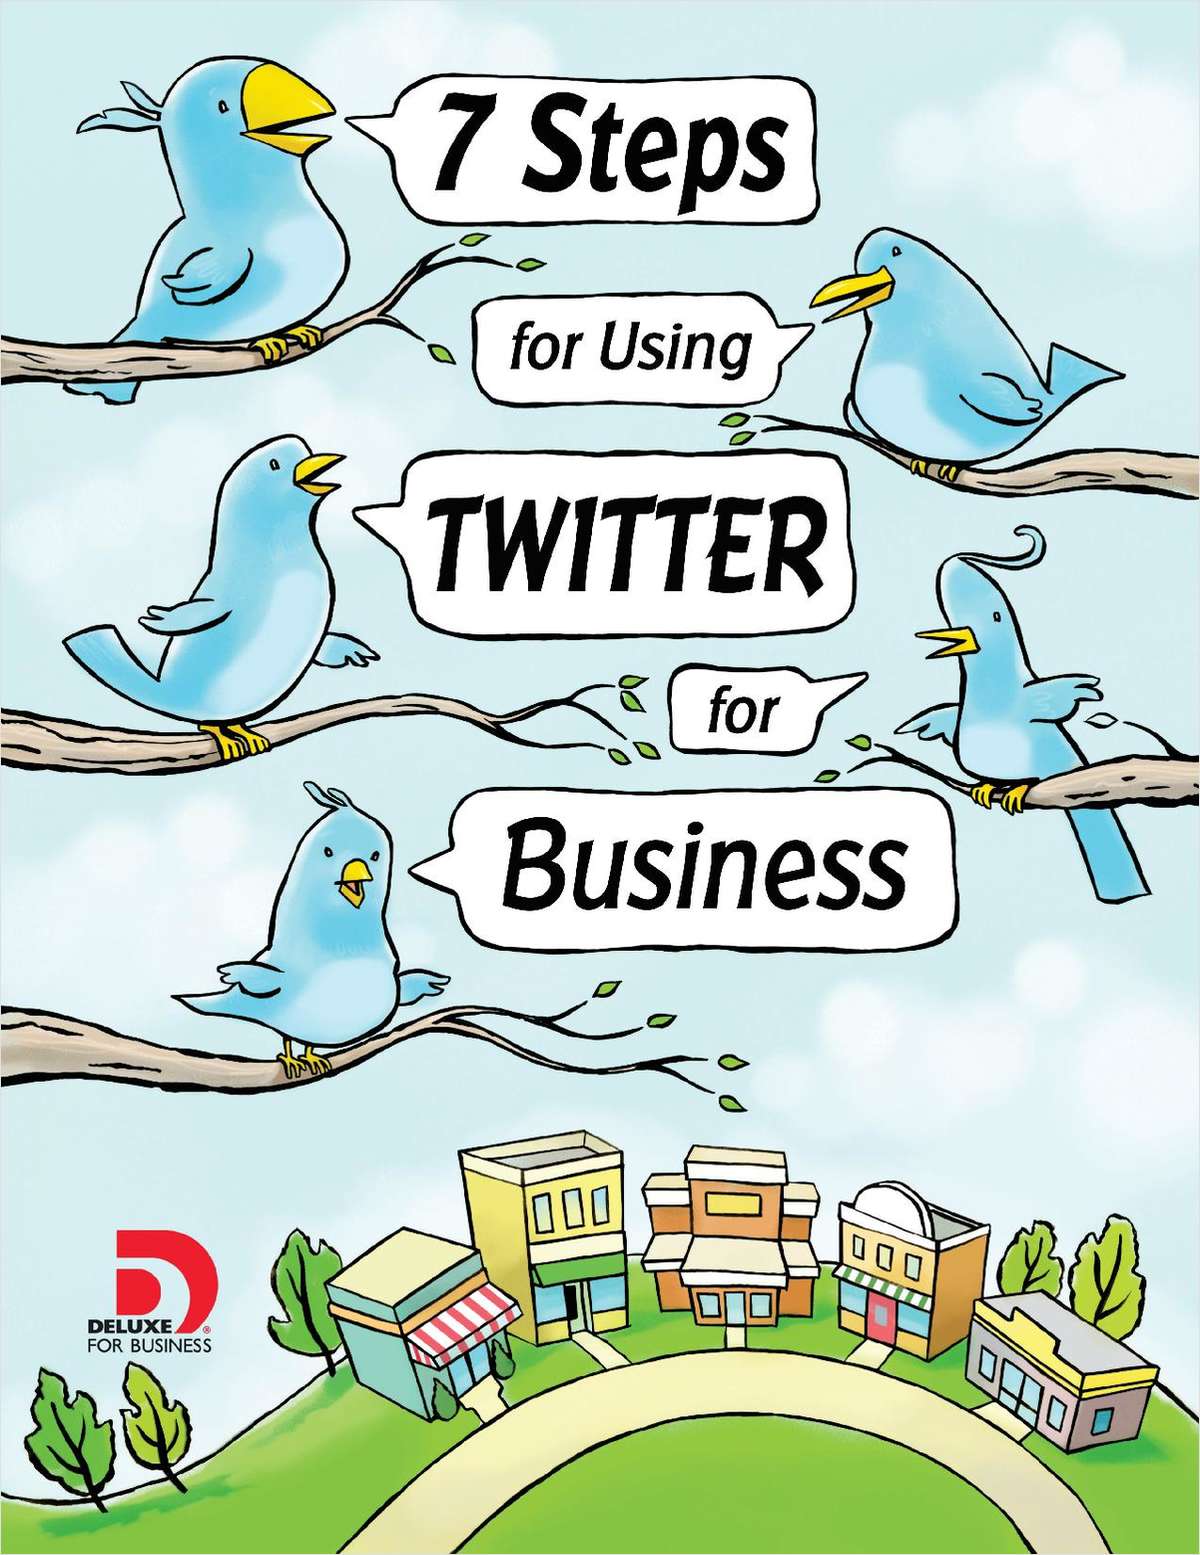 7 Steps for Using Twitter for Small Business